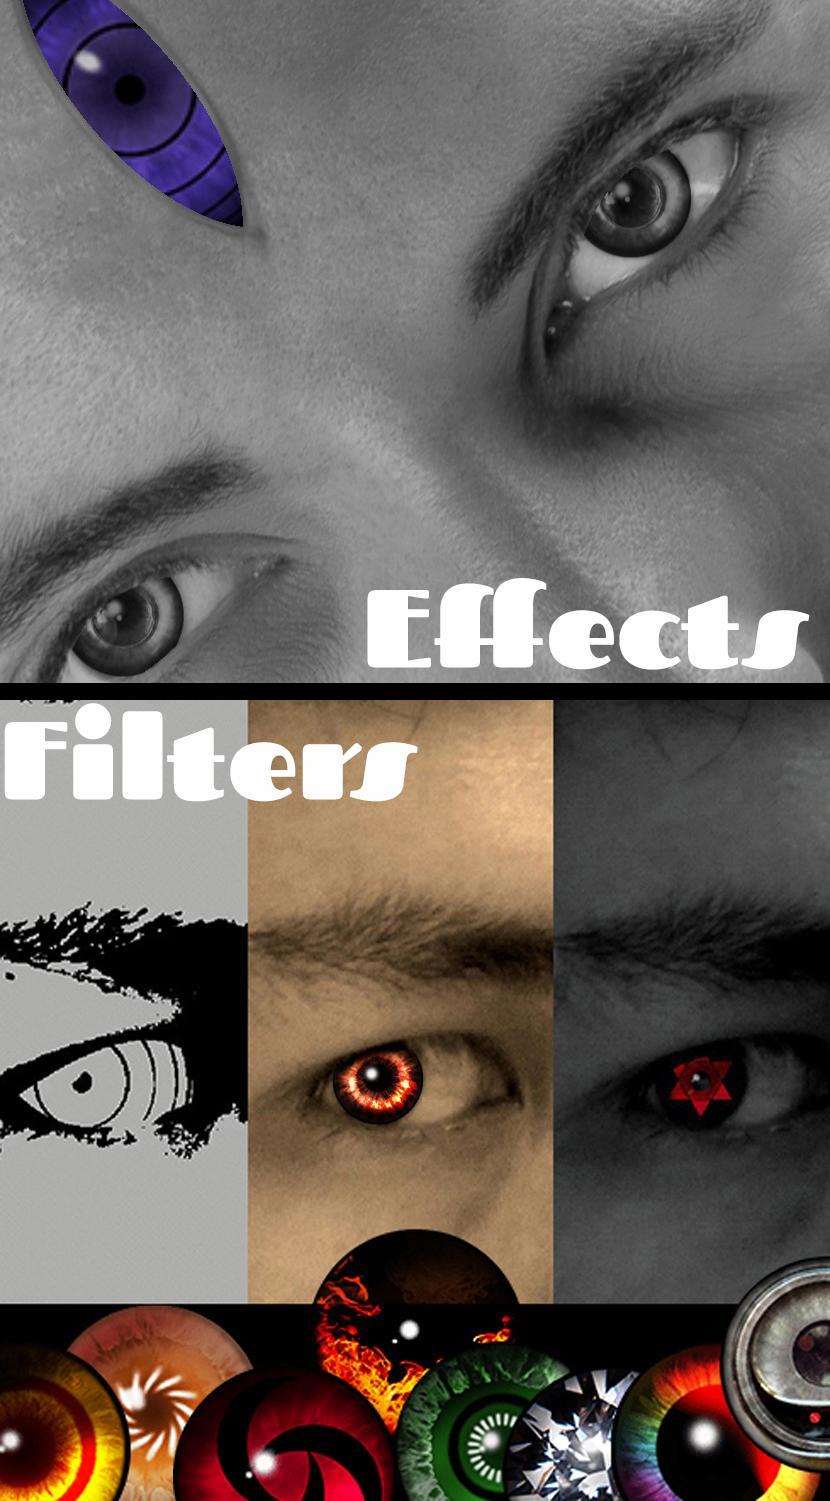 FoxEyes - Change Eye Color by Real Anime Style 2.9.1.1 Screenshot 1